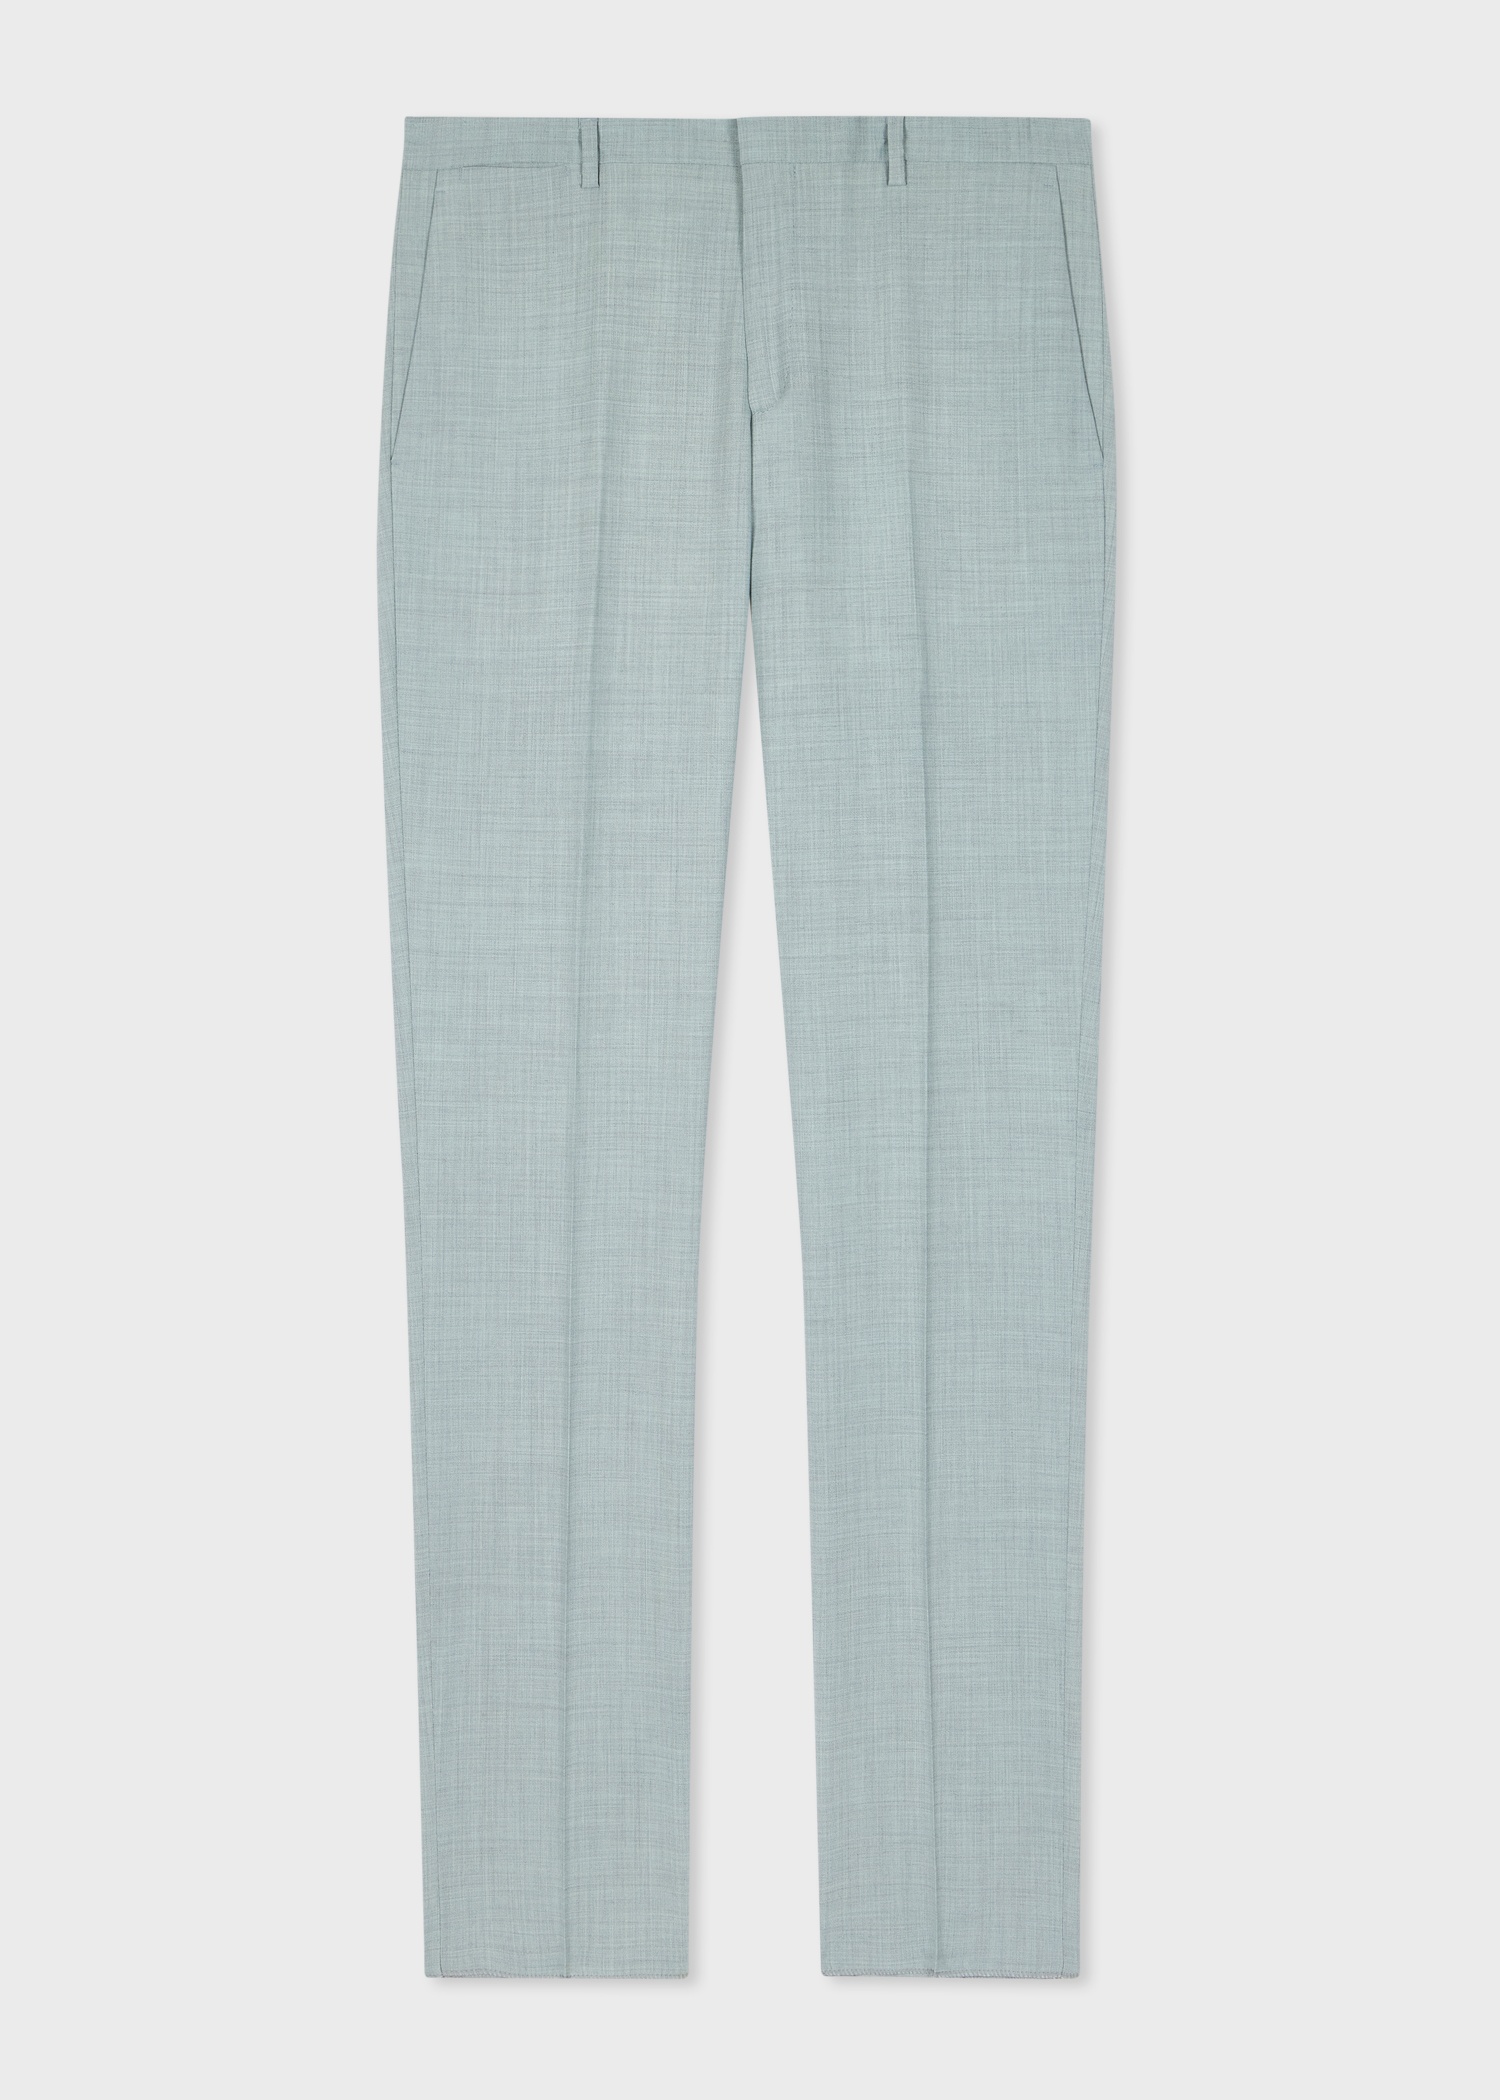 The Kensington - Light Blue Marl Overdyed Stretch-Wool Suit - 2